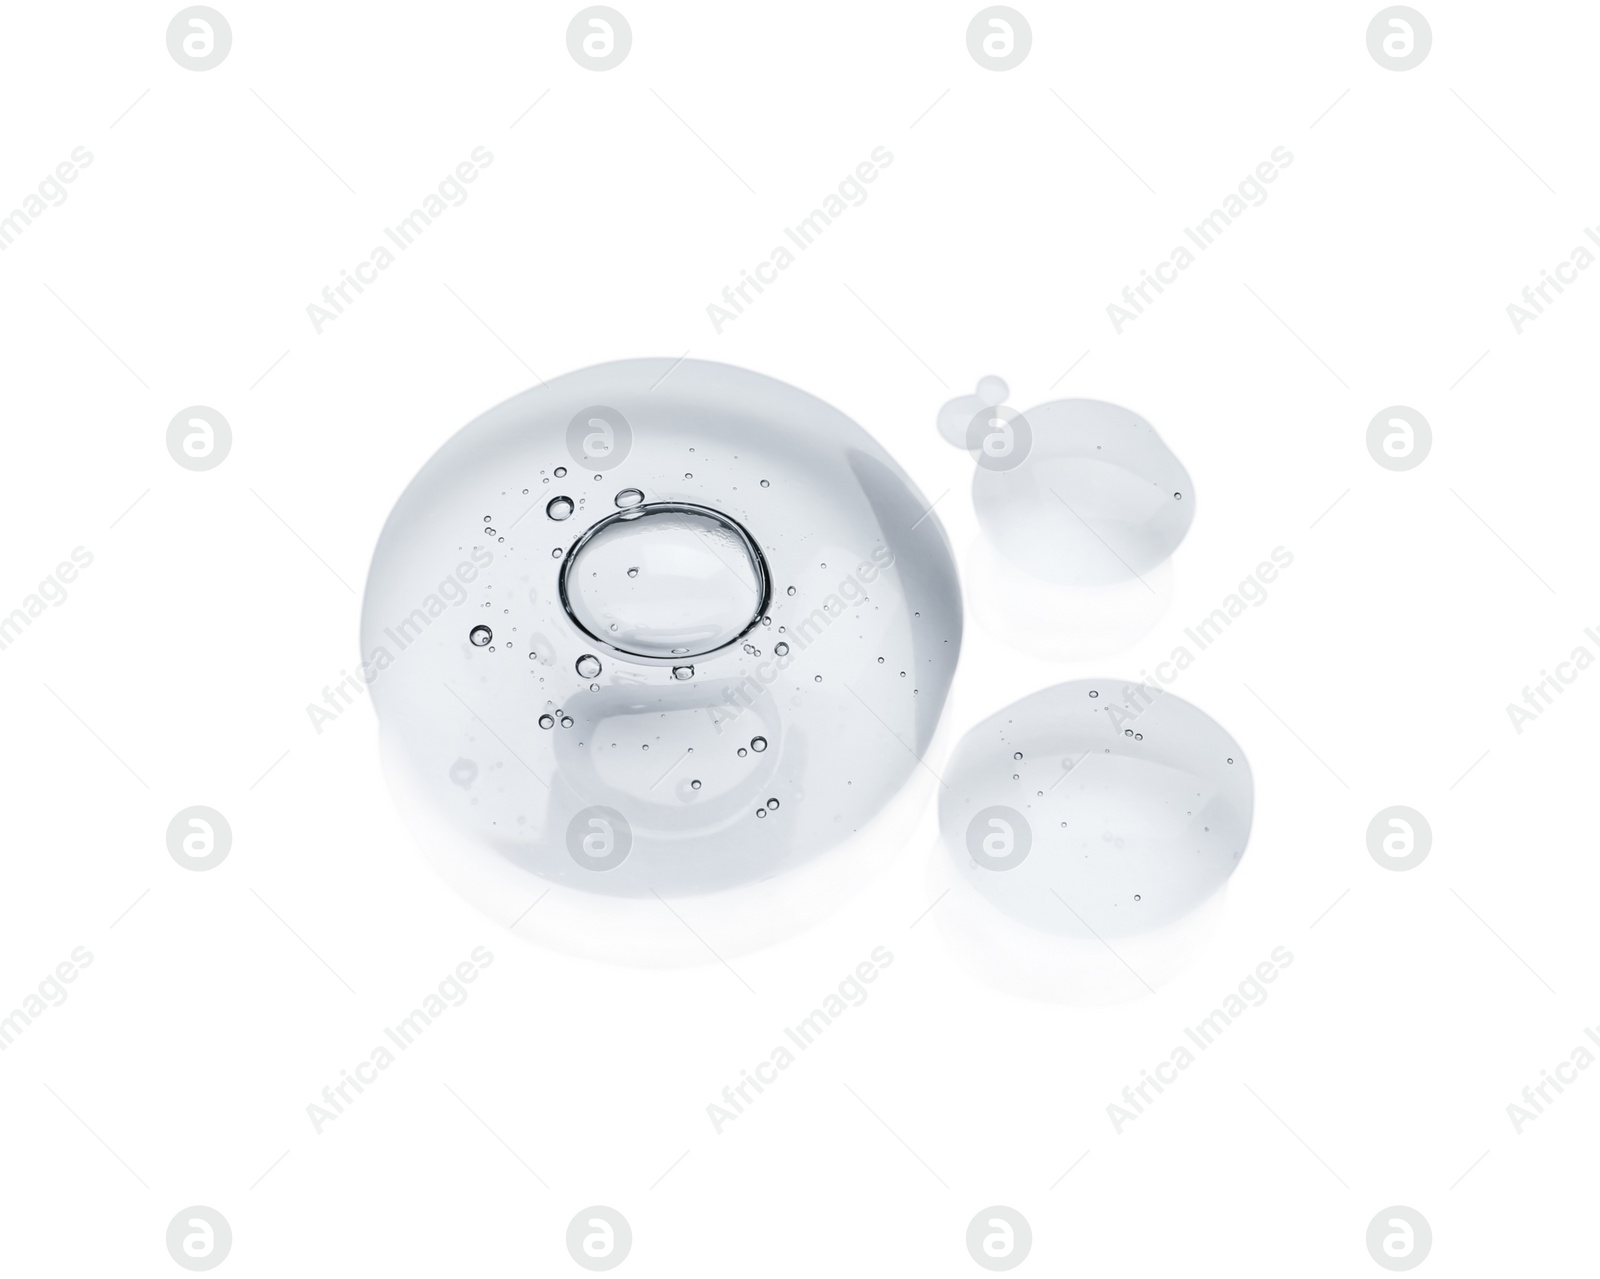 Photo of Drops of cosmetic oil on reflective surface, above view